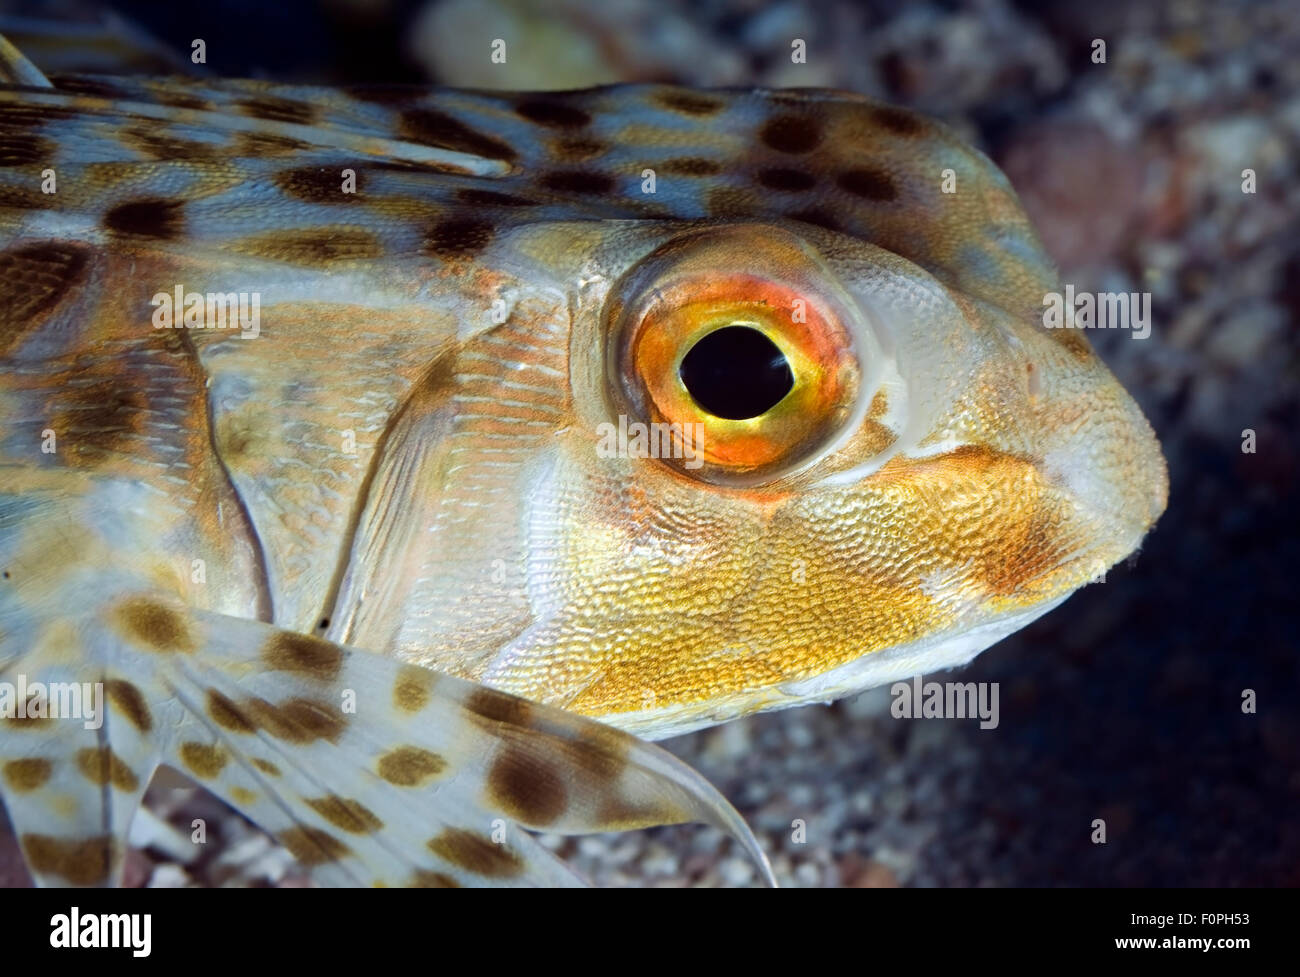 CLOSE-UP VIEW OF HELMET GURNARD ON CORAL REEF Stock Photo